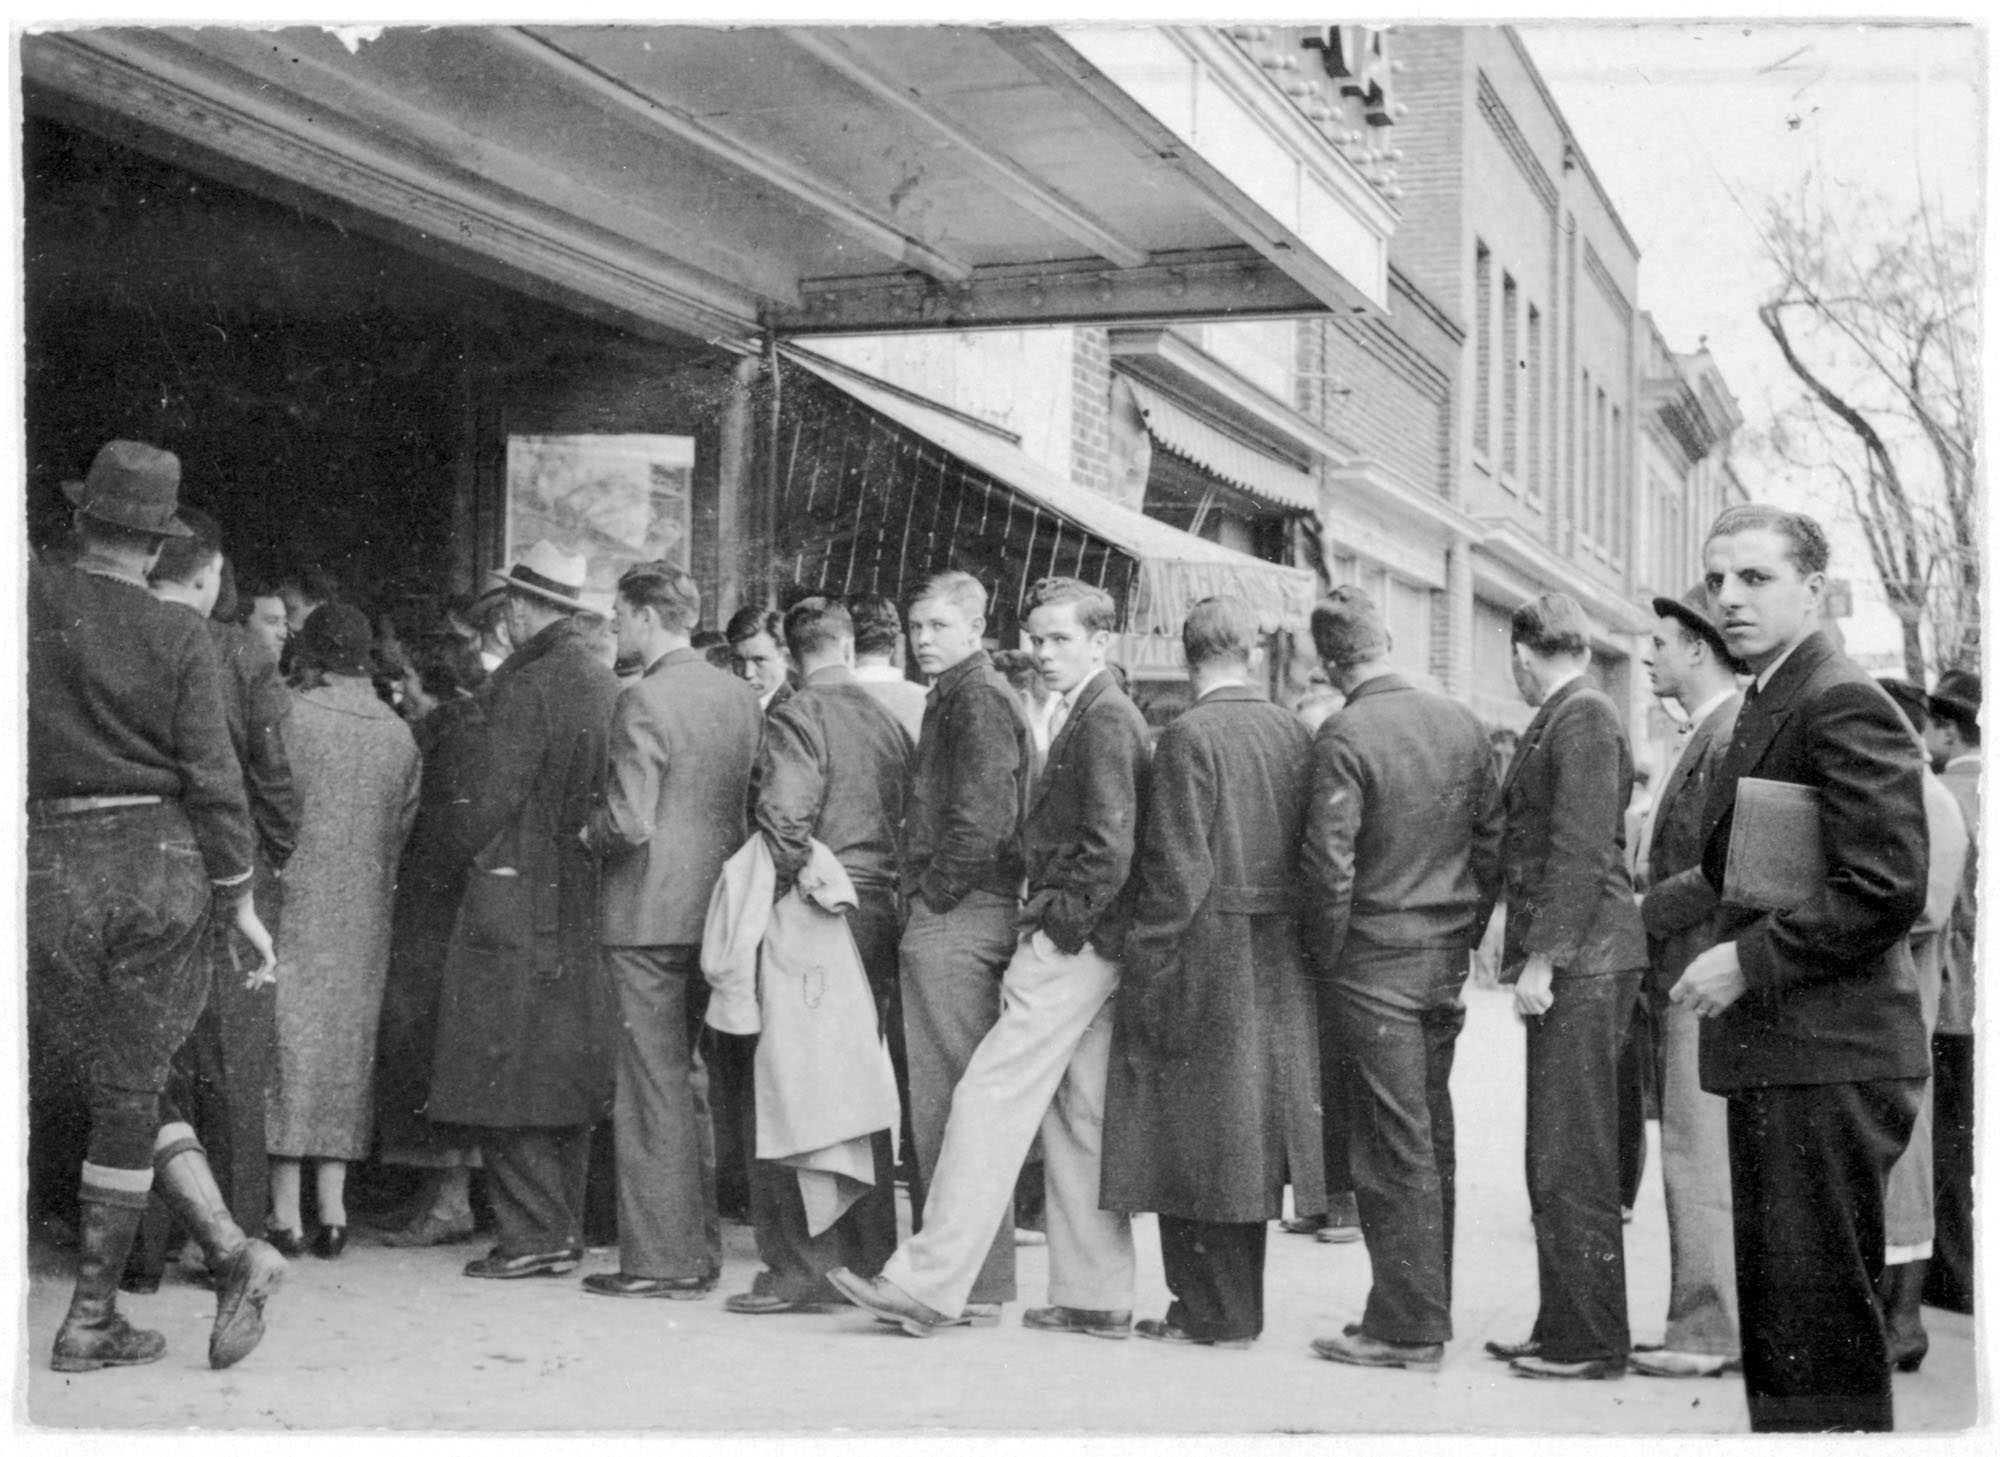 Carolina student walker Percy (light pants, leg extended) waits in line at the Carolina Theater on Franklin St. ca. 1934. (photo courtesy of UNC Libraries)